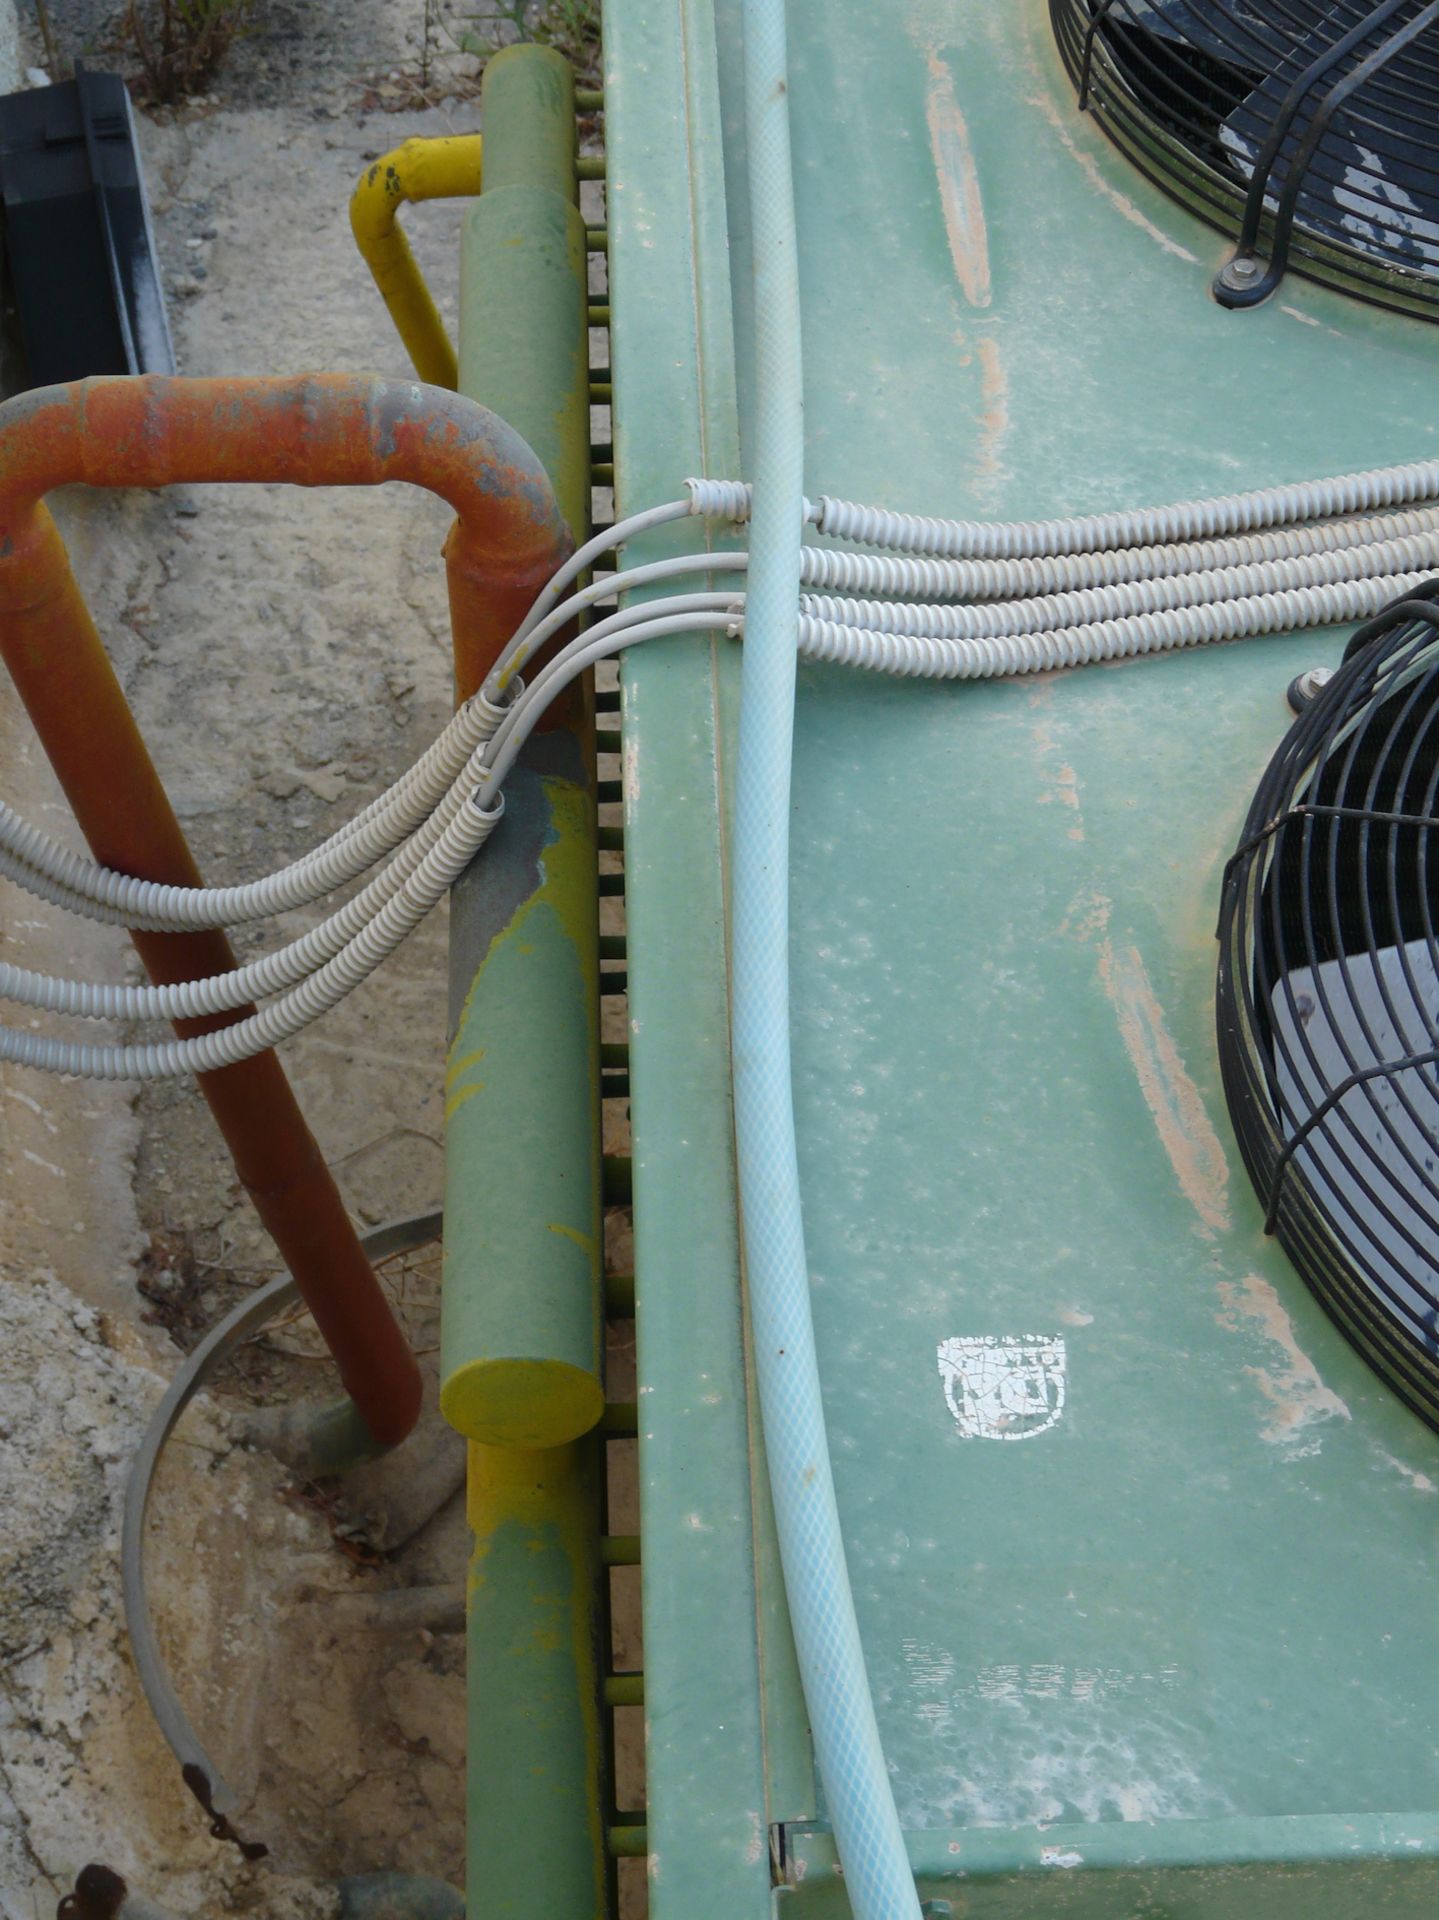 English: Condenser with 4 fans (one is out of order) 180m³ Used for Cold Rooms Greek: Κοντέσερ - Image 6 of 9